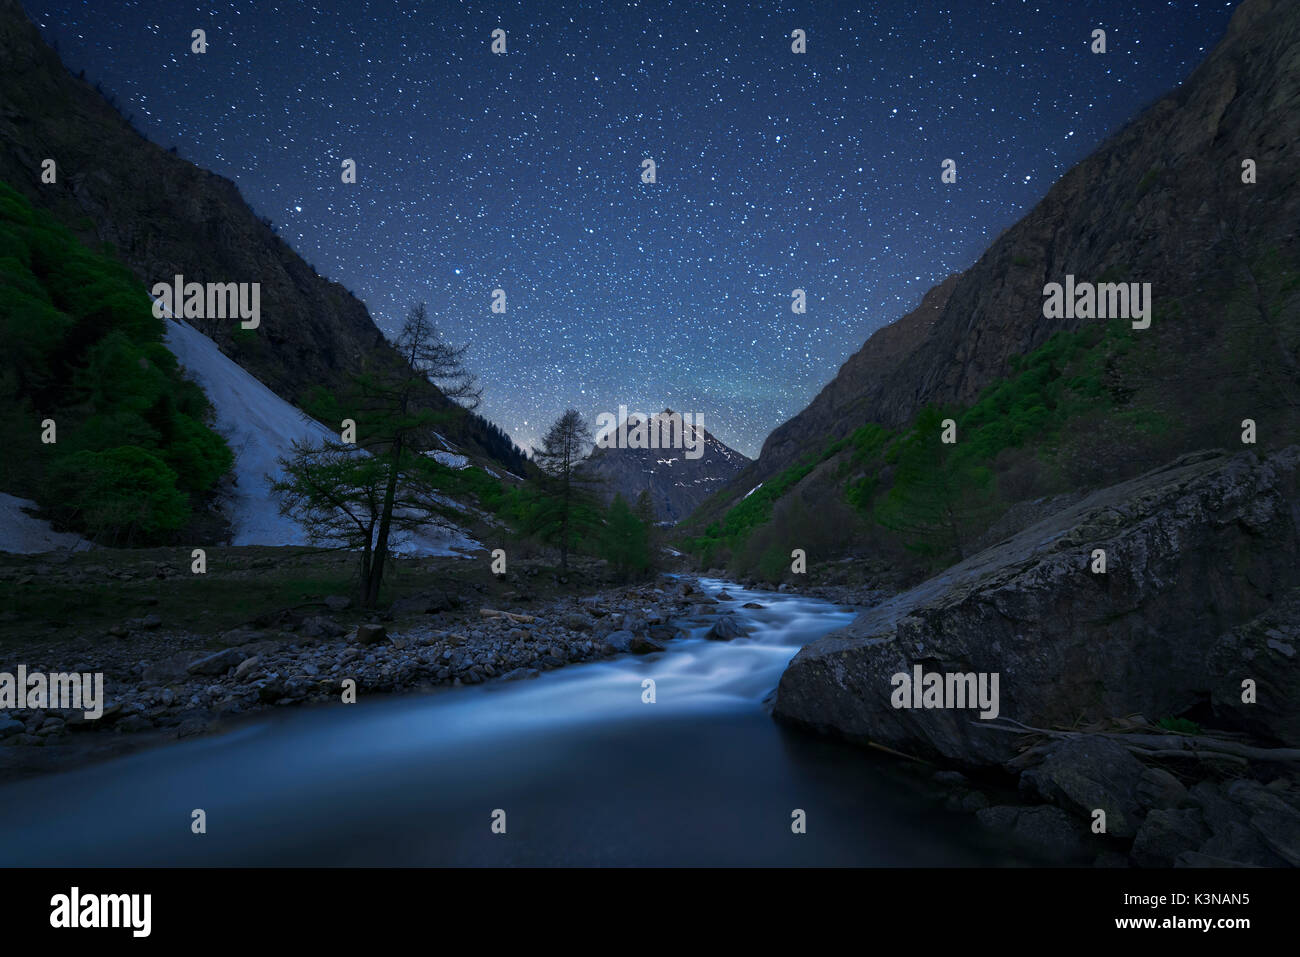 Italy, Piedmont, Cuneo District, Gesso Valley, Alpi Marittime Natural Park, starry night on the Gesso Valley Stock Photo